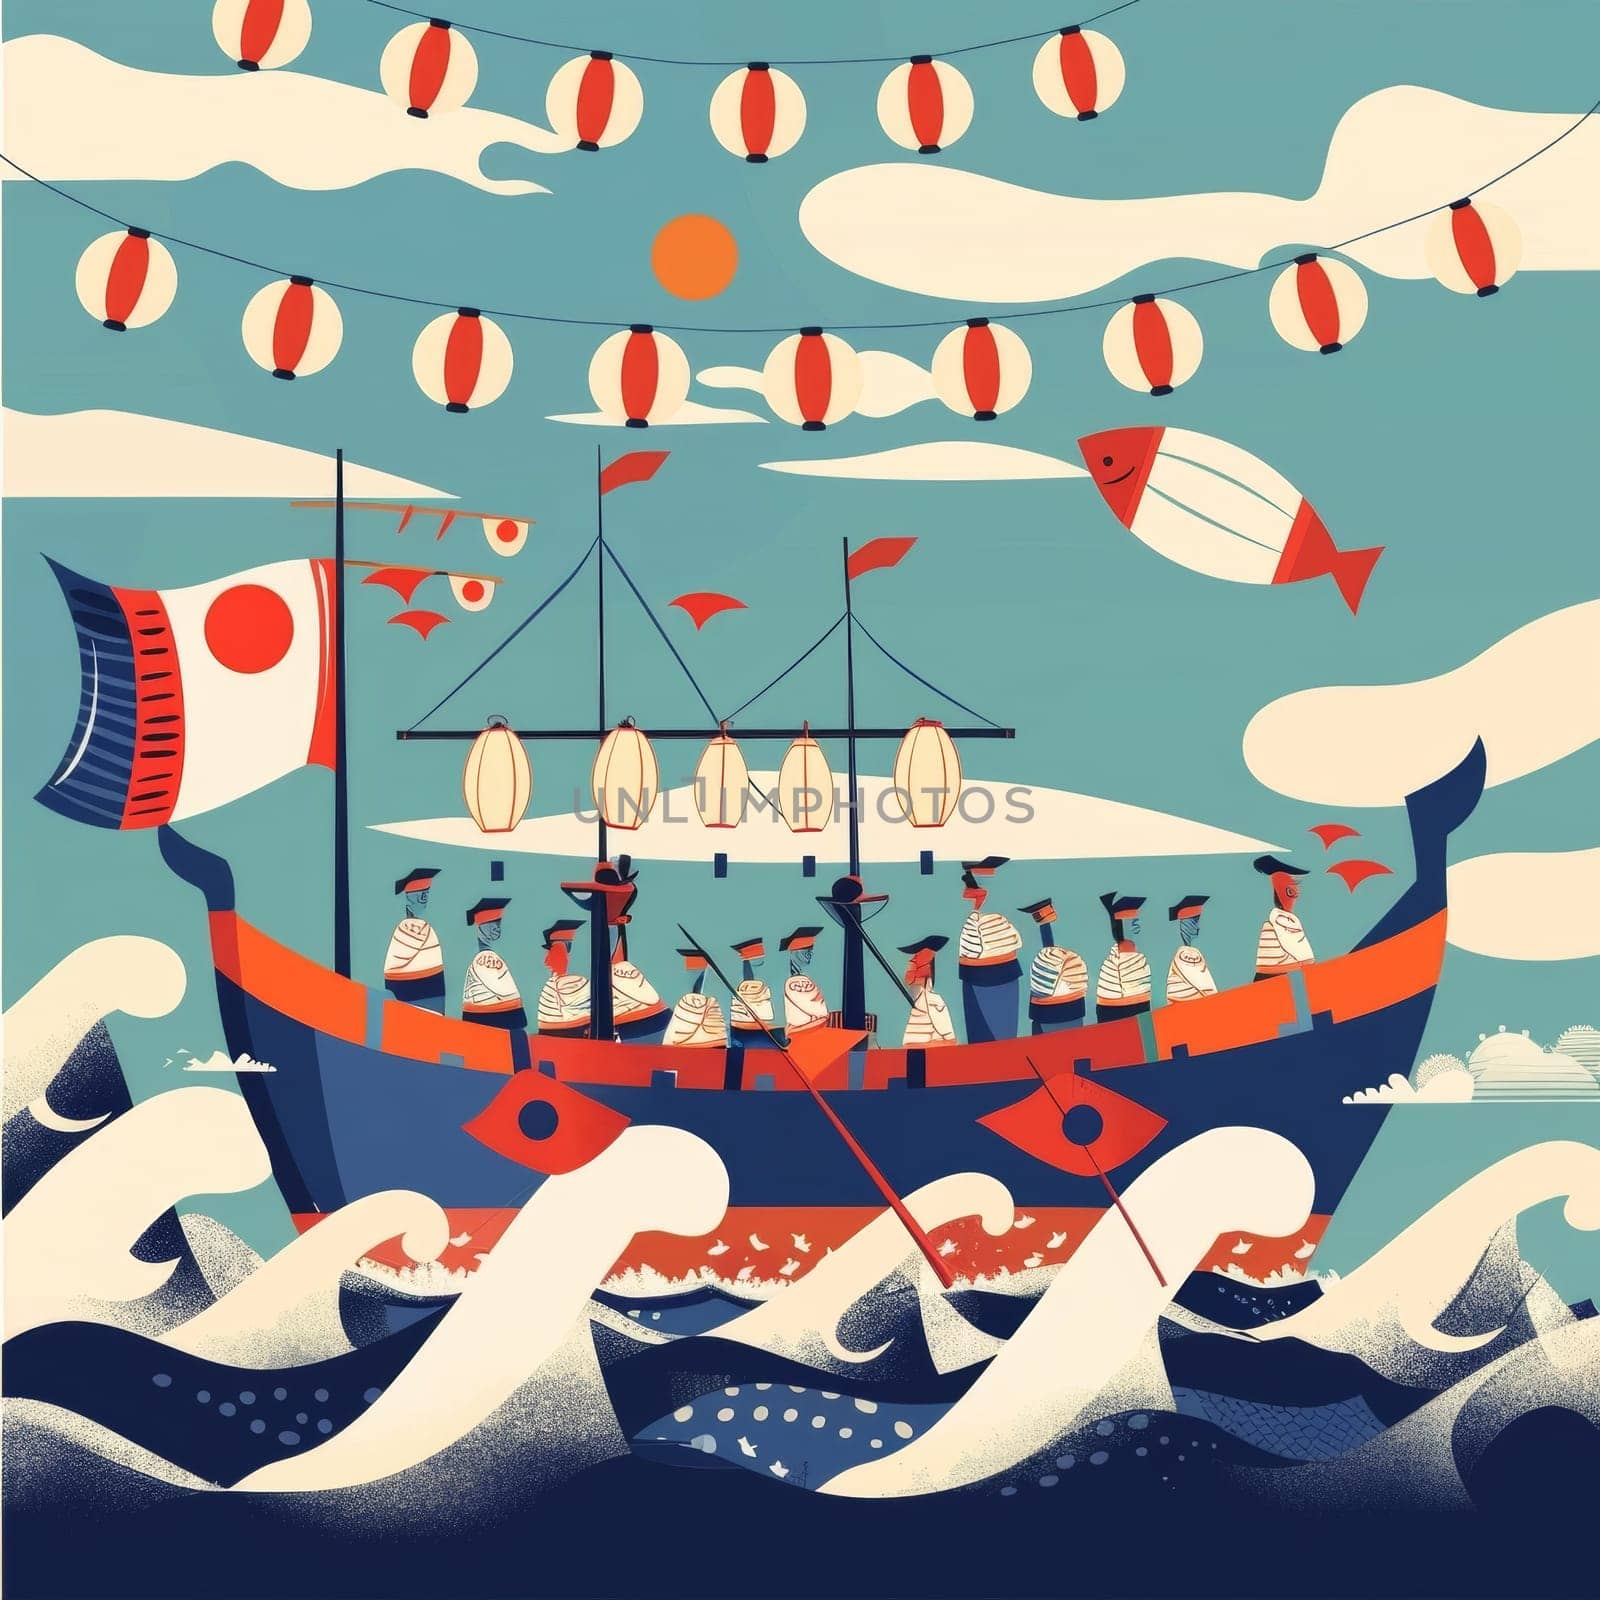 A vibrant and whimsical scene of a lively sea-faring celebration, with a parade of ships, lanterns, and an array of colorful marine creatures. by sfinks